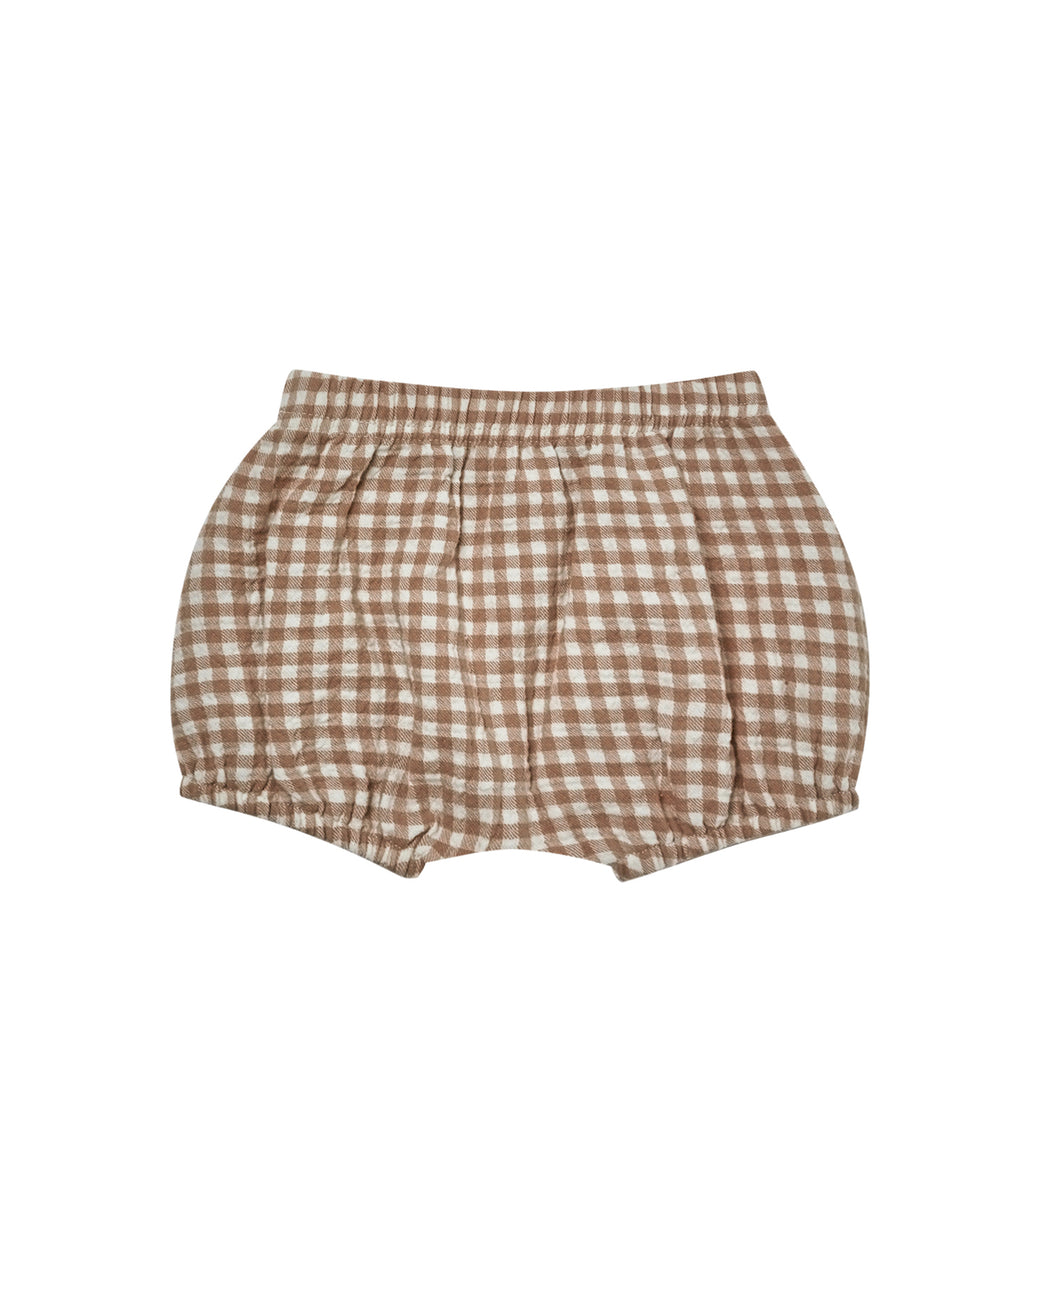 Woven Bloomers – Cocoa Gingham